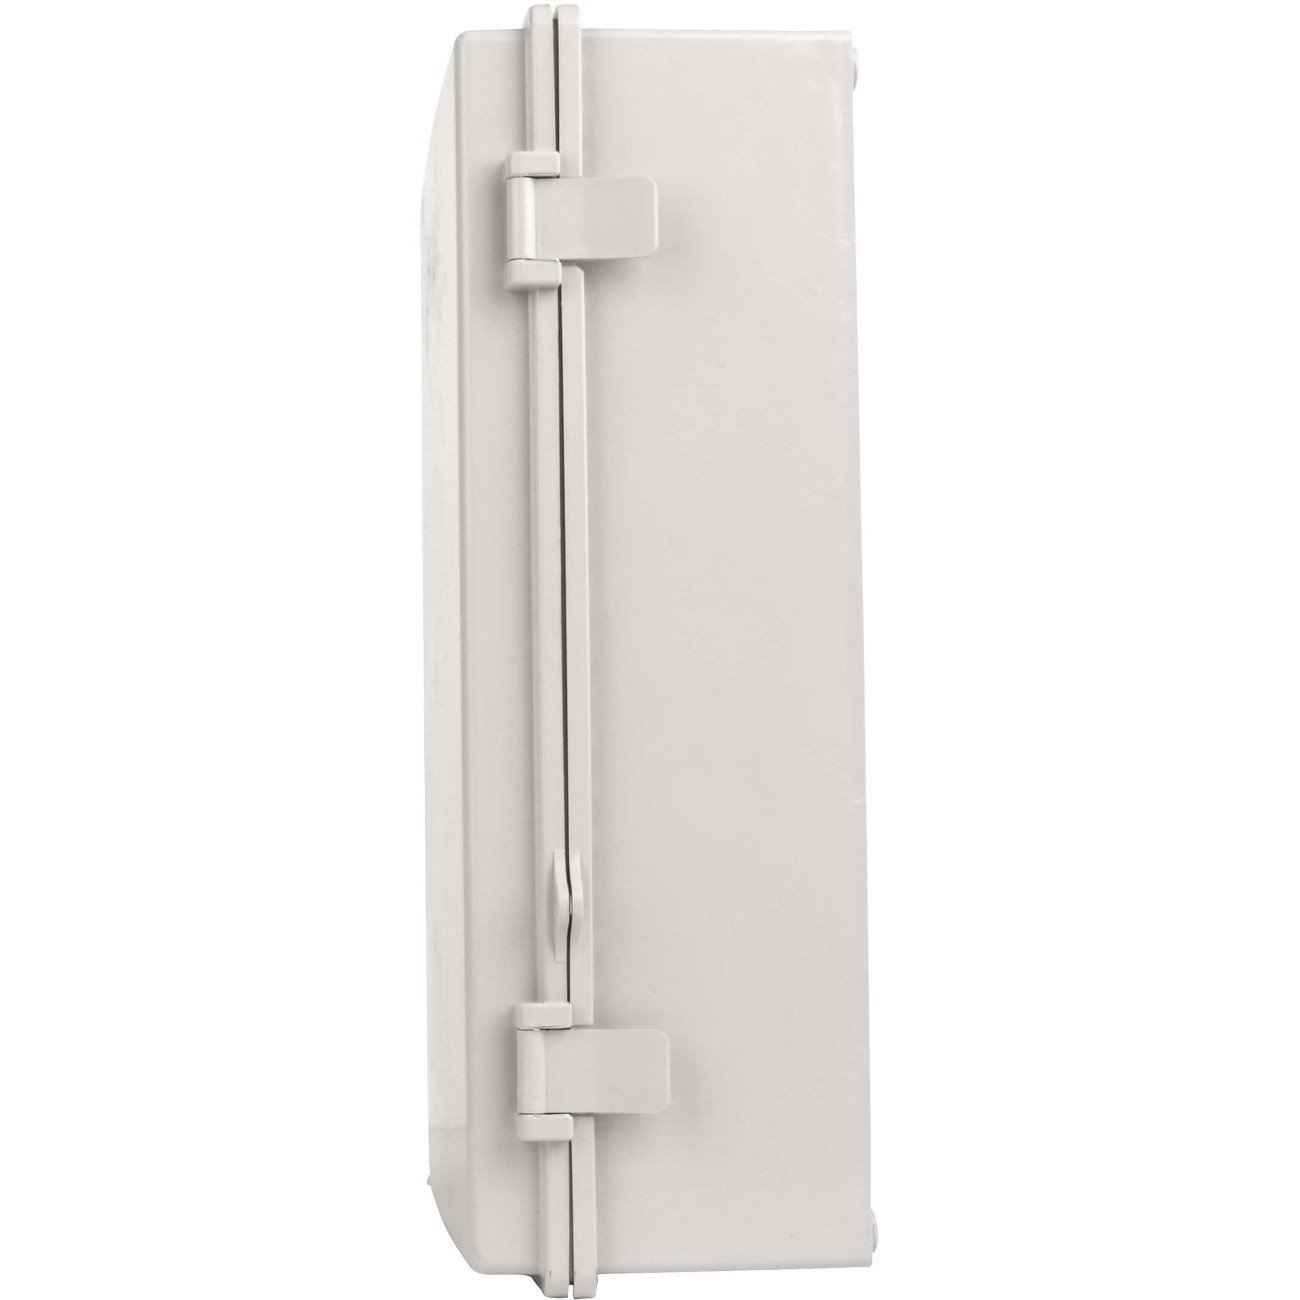 Tripp Lite by Eaton Wireless Access Point Enclosure with Hasp - NEMA 4, Surface-Mount, PC Construction, 15 x 11 in.